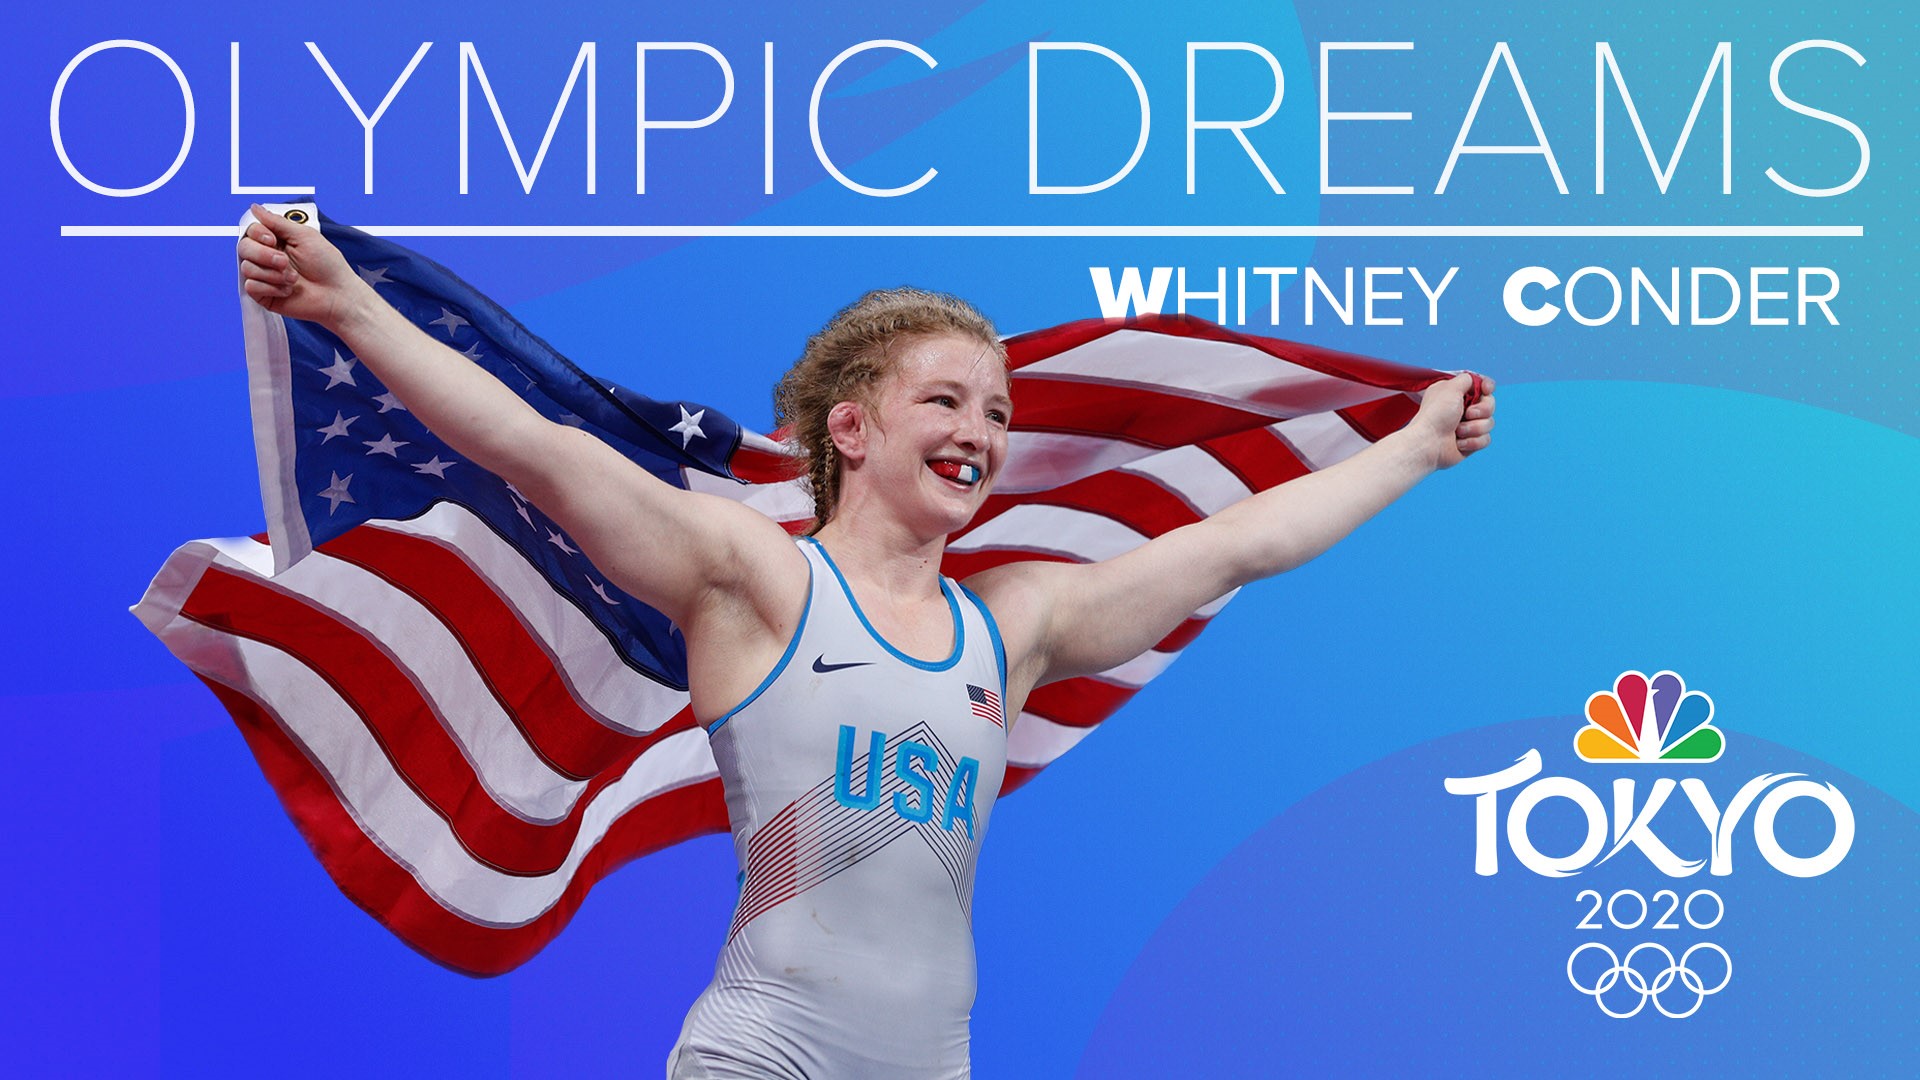 32-year-old wrestler Whitney Conder from Puyallup is hoping to be the first female wrestler to represent Team USA in the Tokyo Olympics.